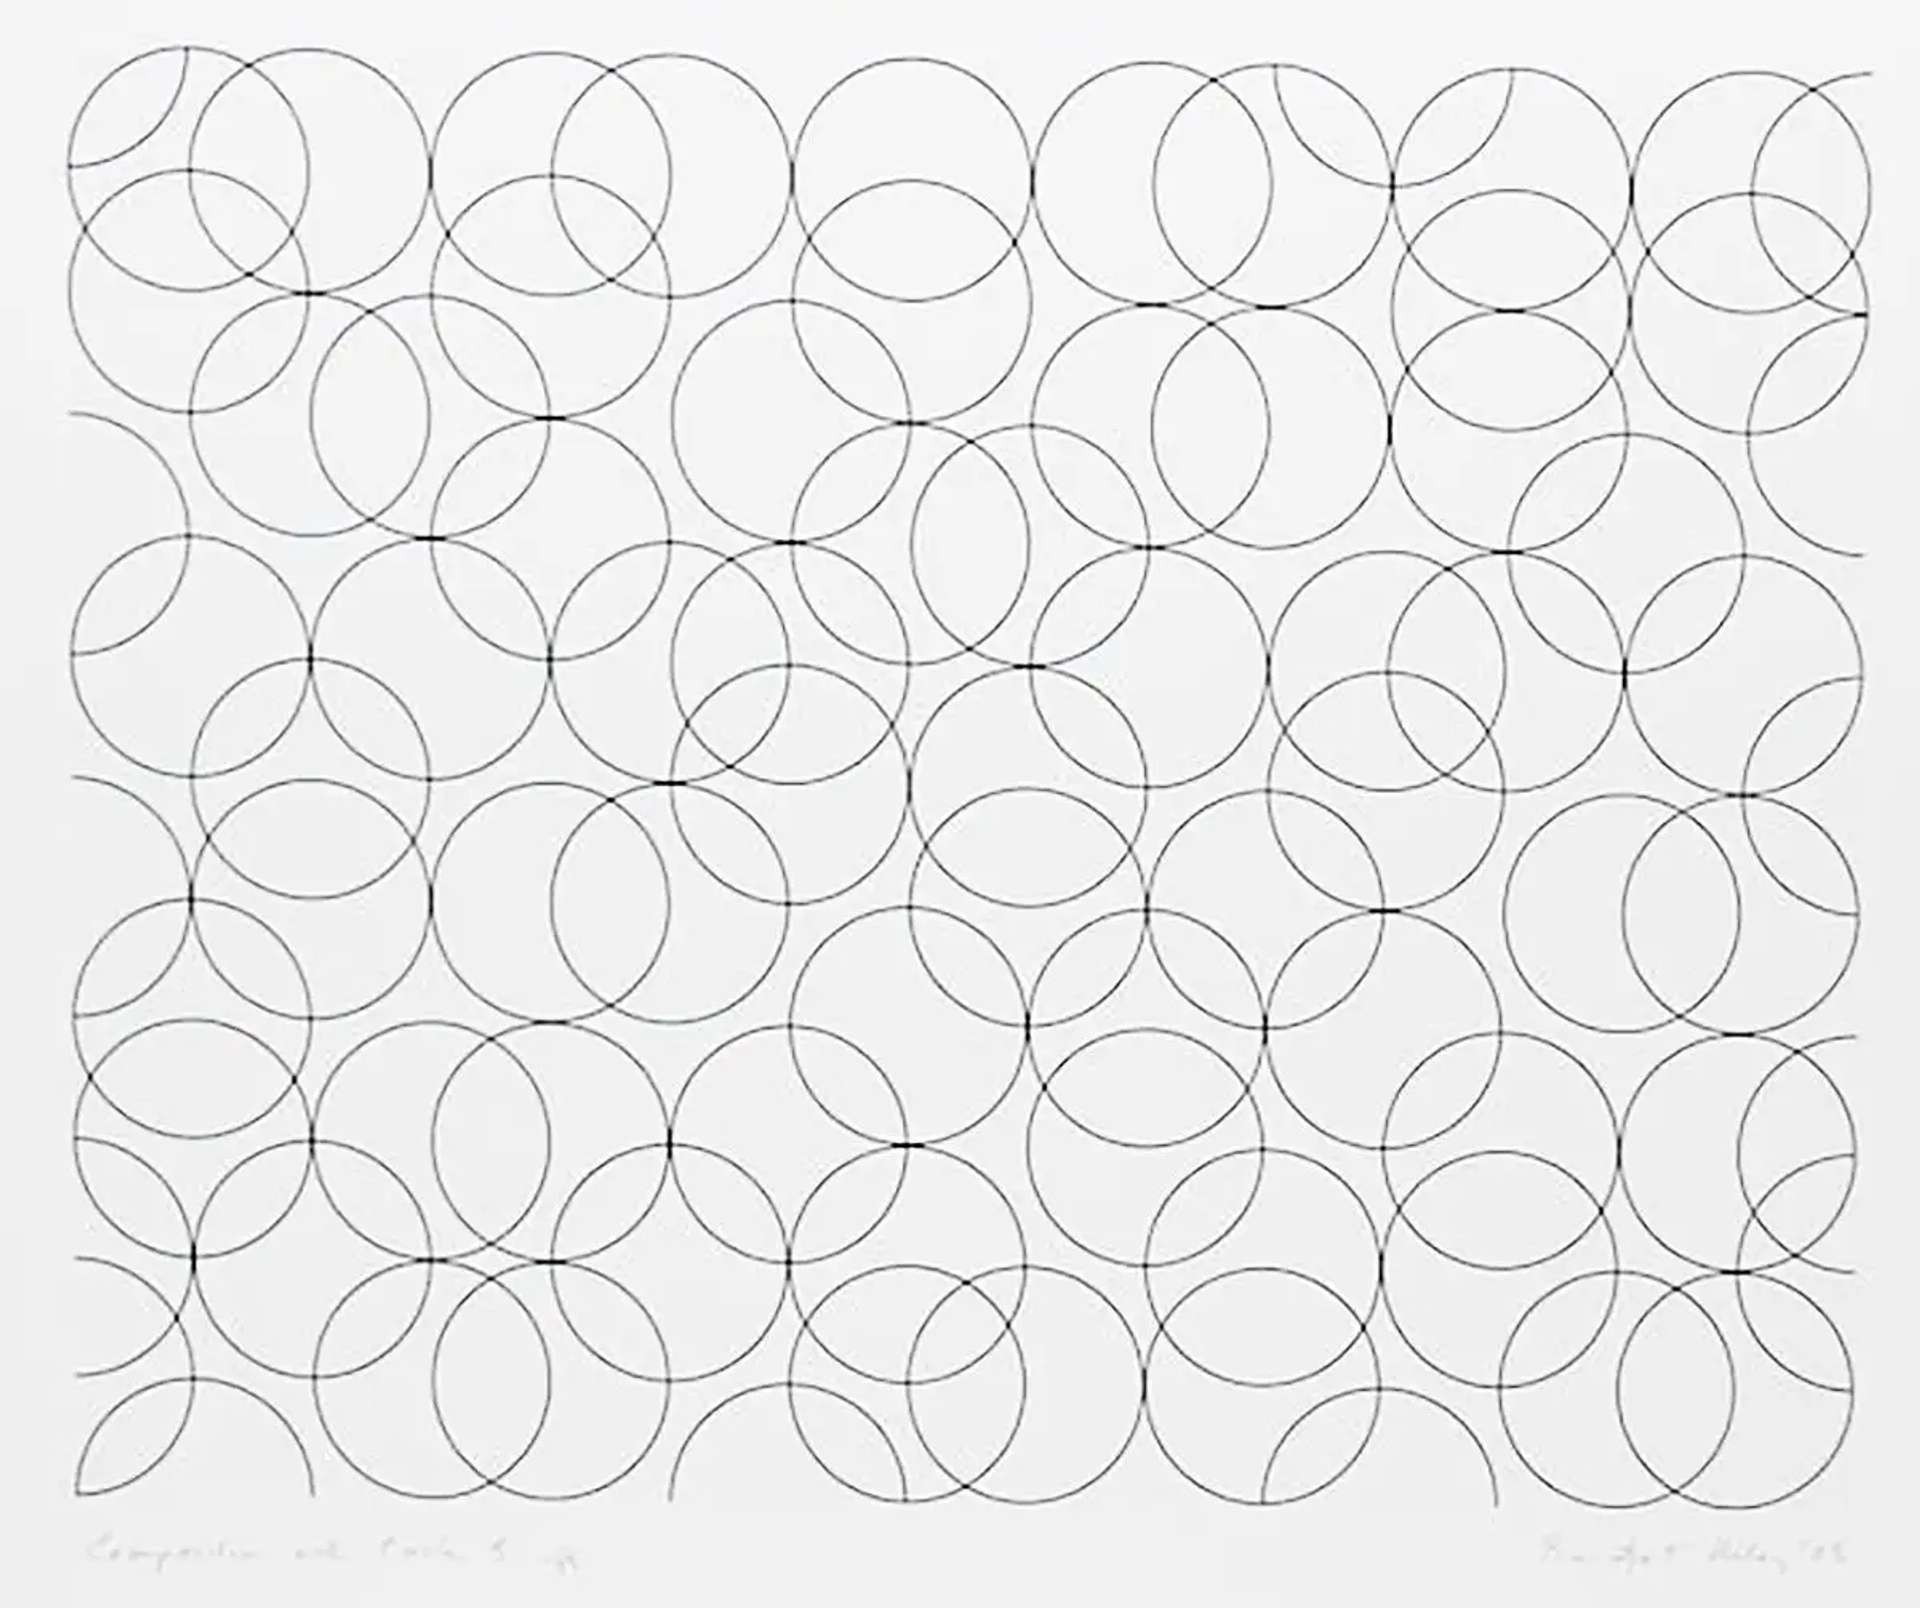 A square made up of thin, unfilled circles in fine line.